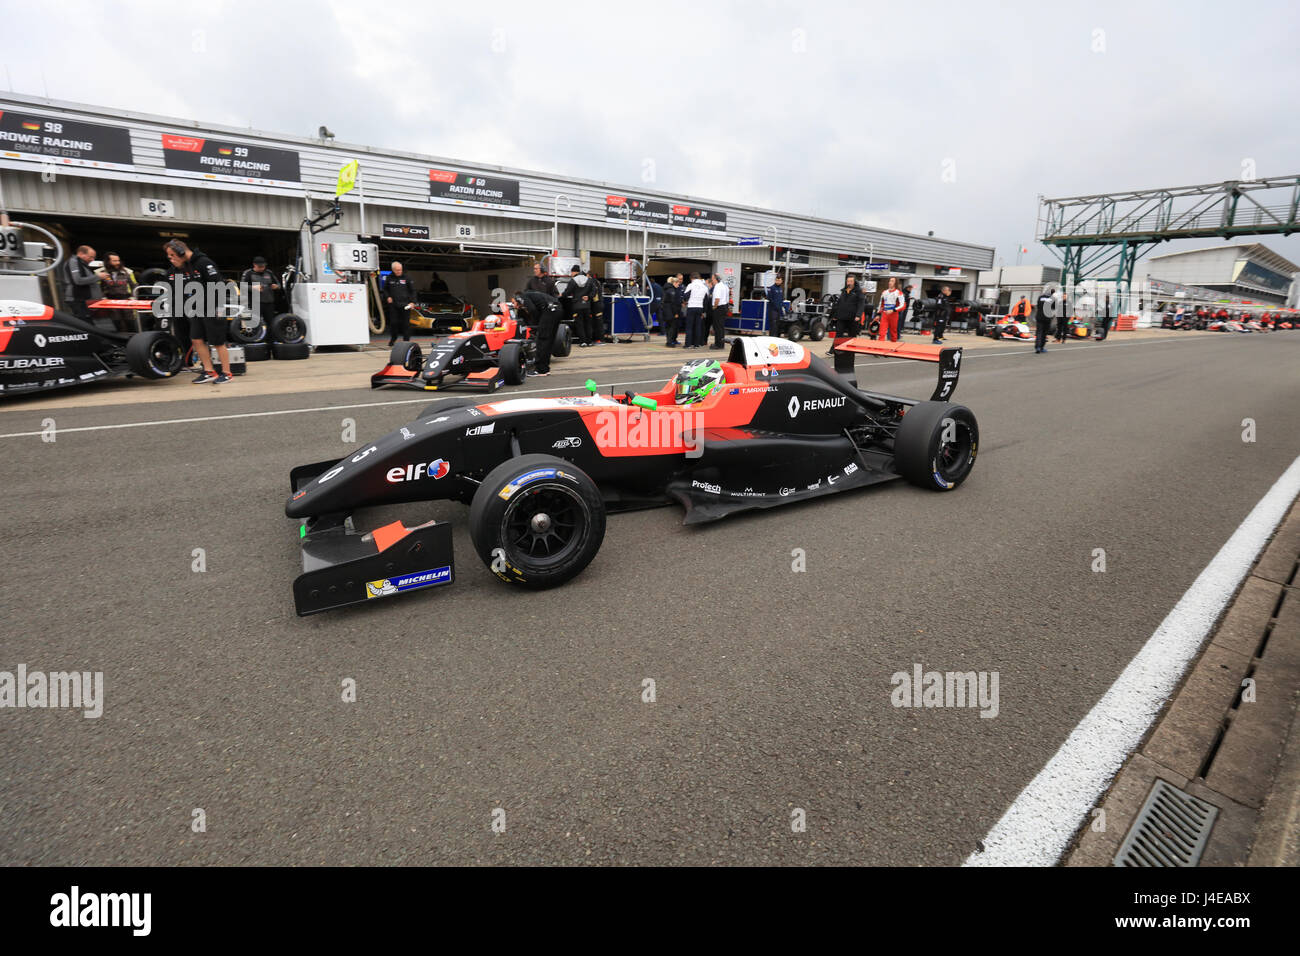 Silverstone, United Kingdom. 13th May, 2017. Silverstone, United Kingdom. 13th May, 2017. The number 5 car of Thomas Maxwell and Tech 1 Racing entering the pits for the Formula Renault 2.0 Eurocup at Silverstone Credit: Paren Raval/Alamy Live News Stock Photo